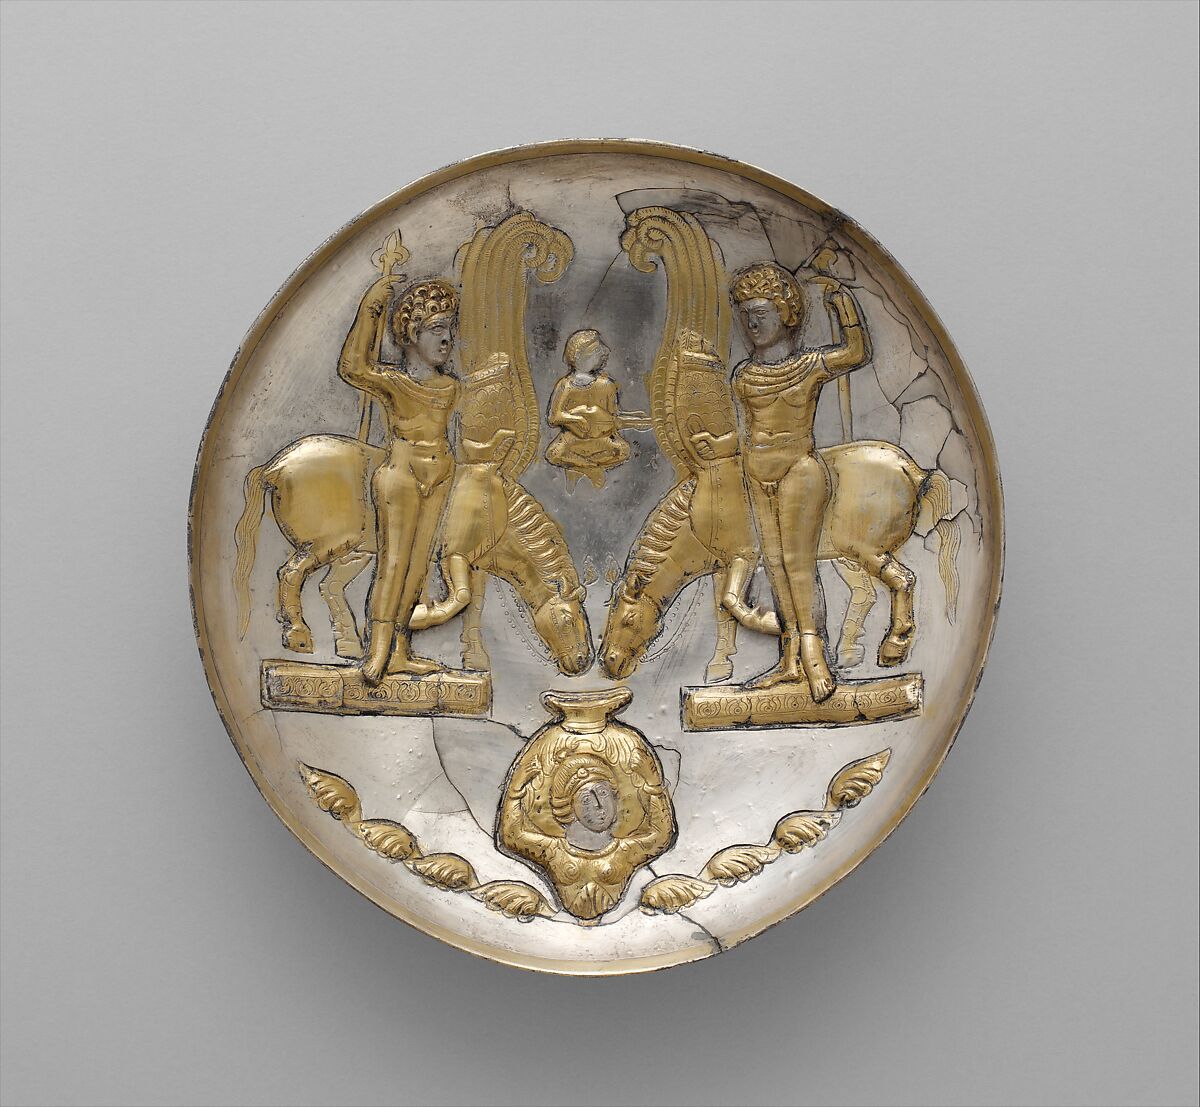 Plate with youths and winged horses, Silver, mercury gilding, Sasanian 